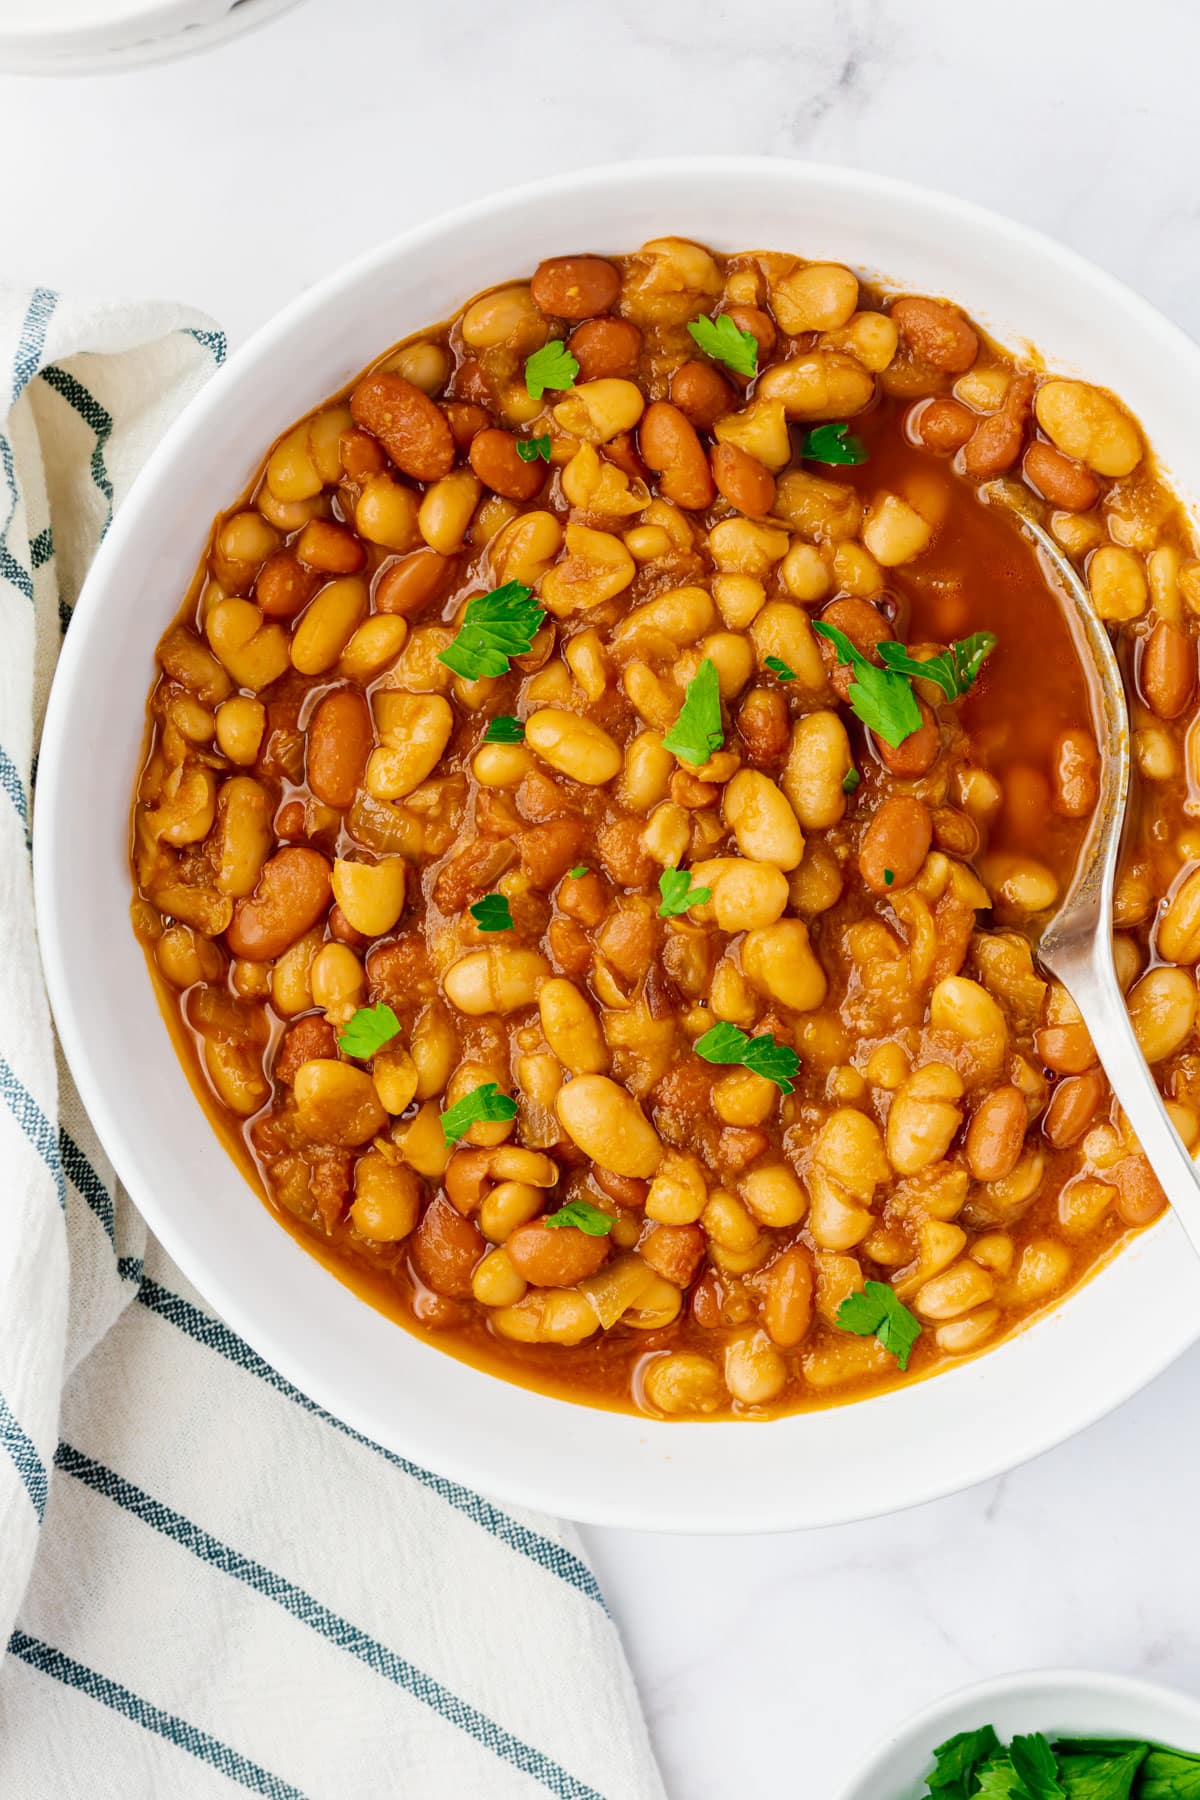 Top view photo of a white bowl filled with Instant Pot Baked Beans. There is a spoon in the bowl, and a kitchen towel by the bowl.